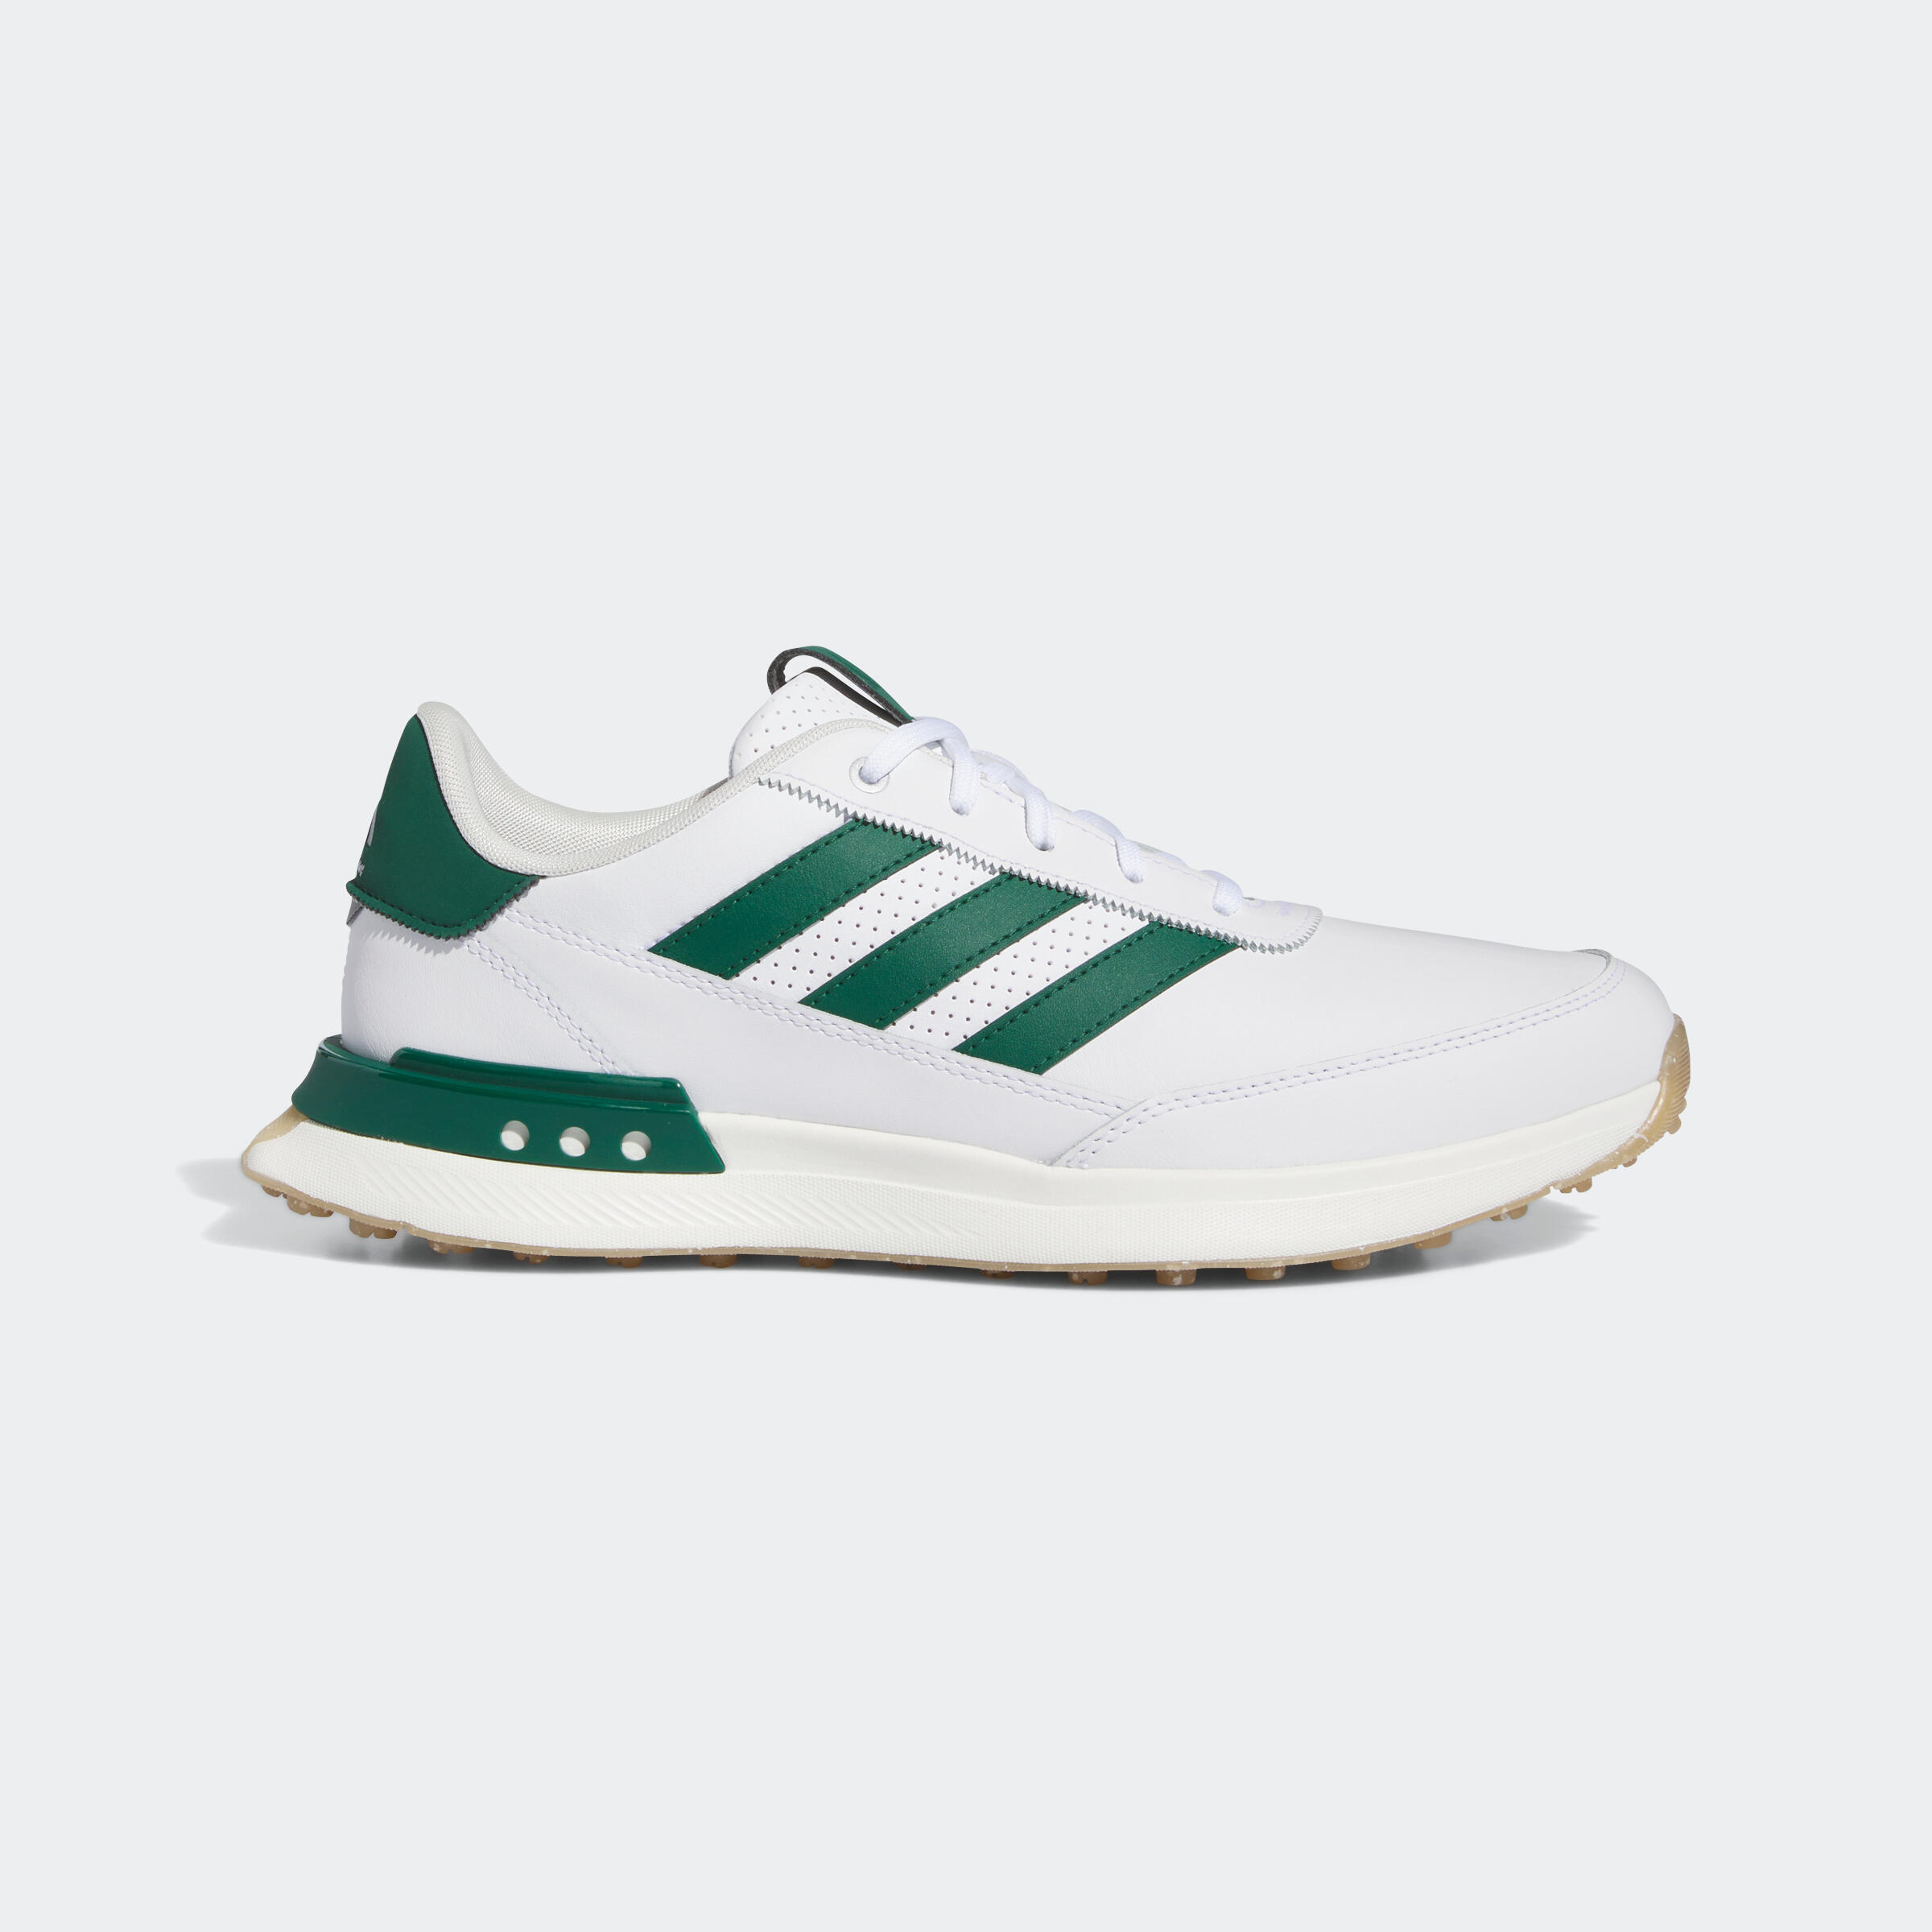 Adidas Men's Golf Shoes S2g Waterproof - White And Green